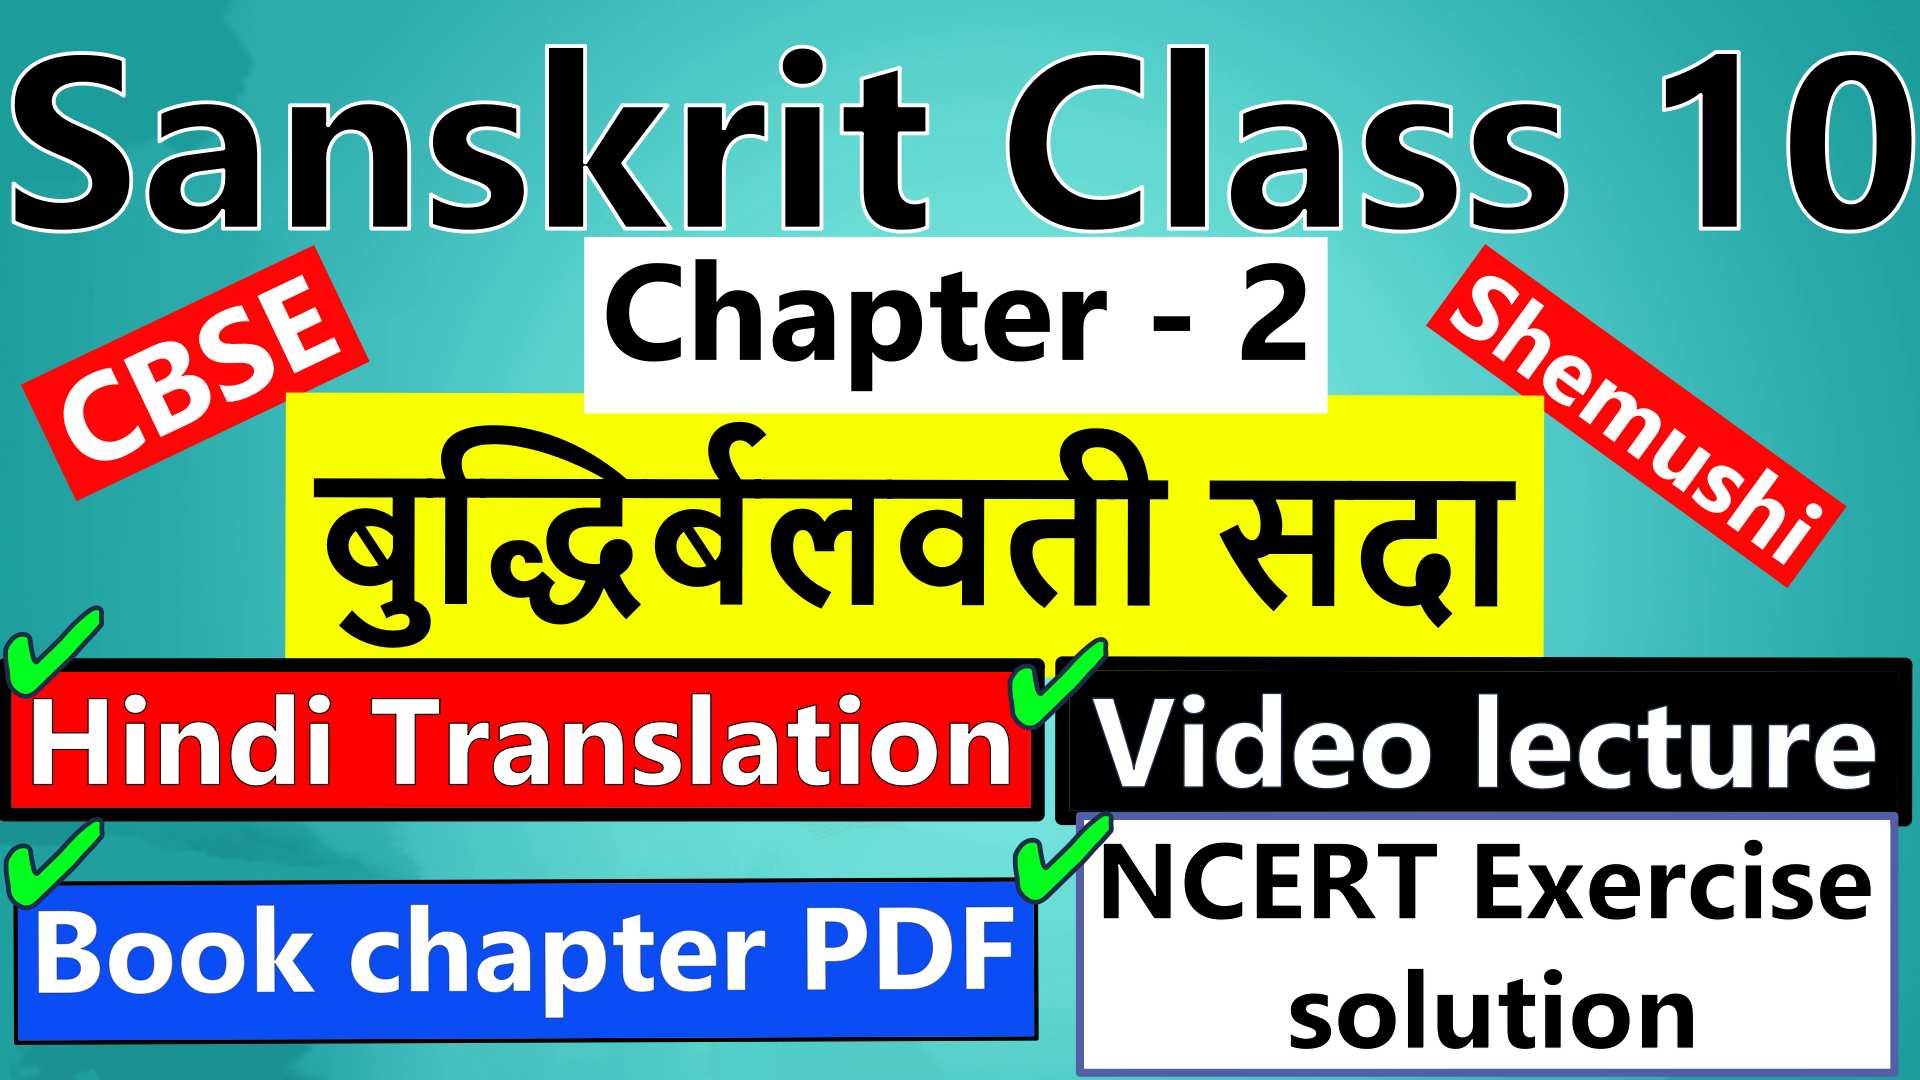 sanskrit-class-10-chapter-2-बुद्धिर्बलवती-सदा-Hindi-Translation-Video-lecture-NCERT-Exercise-Solution-Question-Answer-Book-chapter-PDF